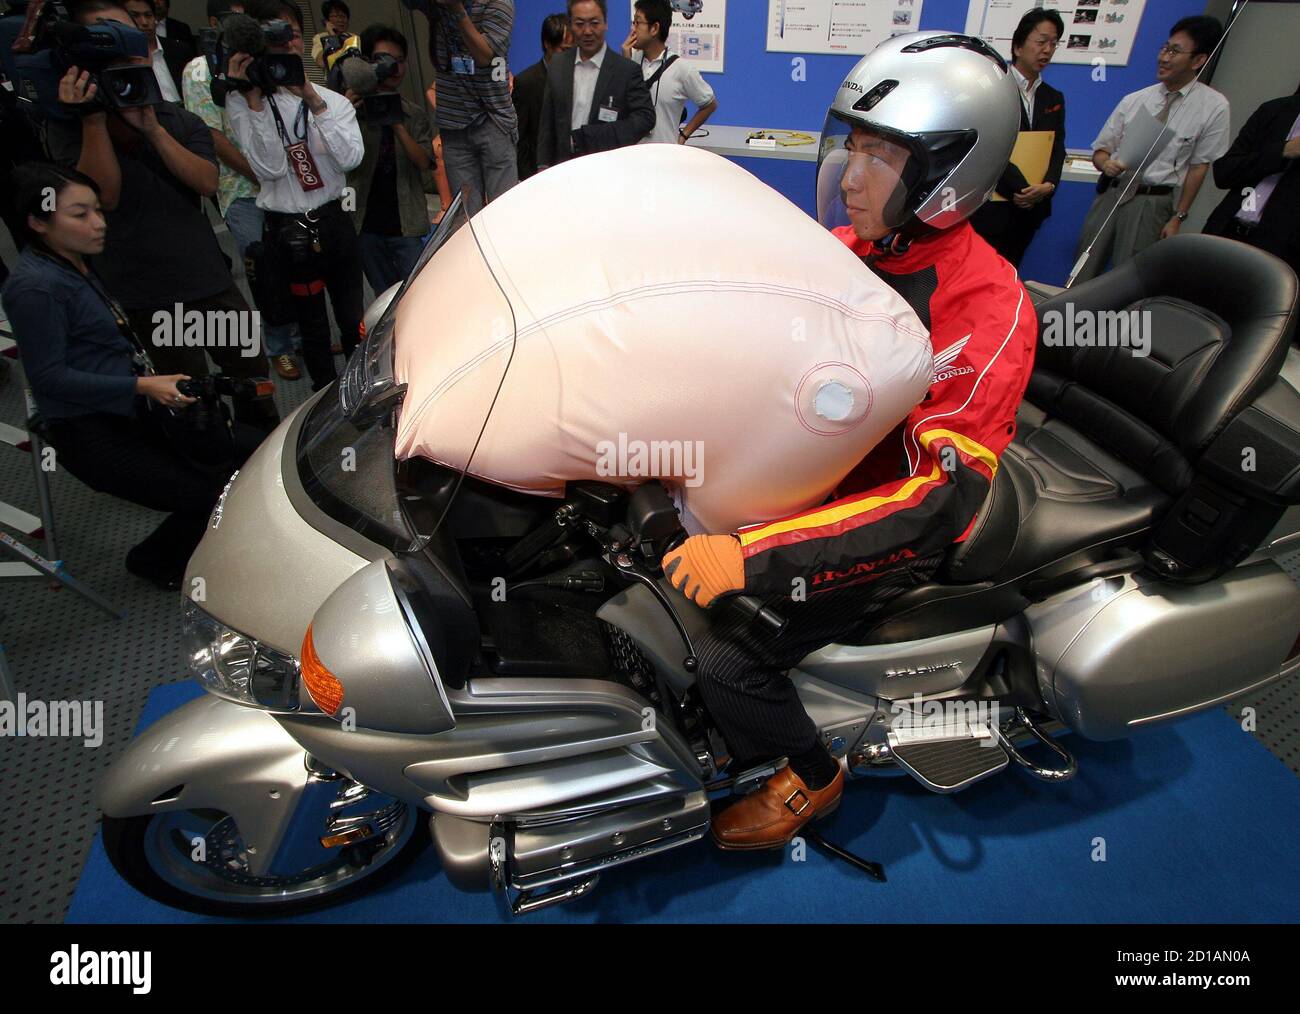 Honda Motor shows world's first airbag system to be mounted on production  model motorcycle at Honda headquarters in Tokyo. Honda Motor shows the  world's first airbag system to be mounted on a